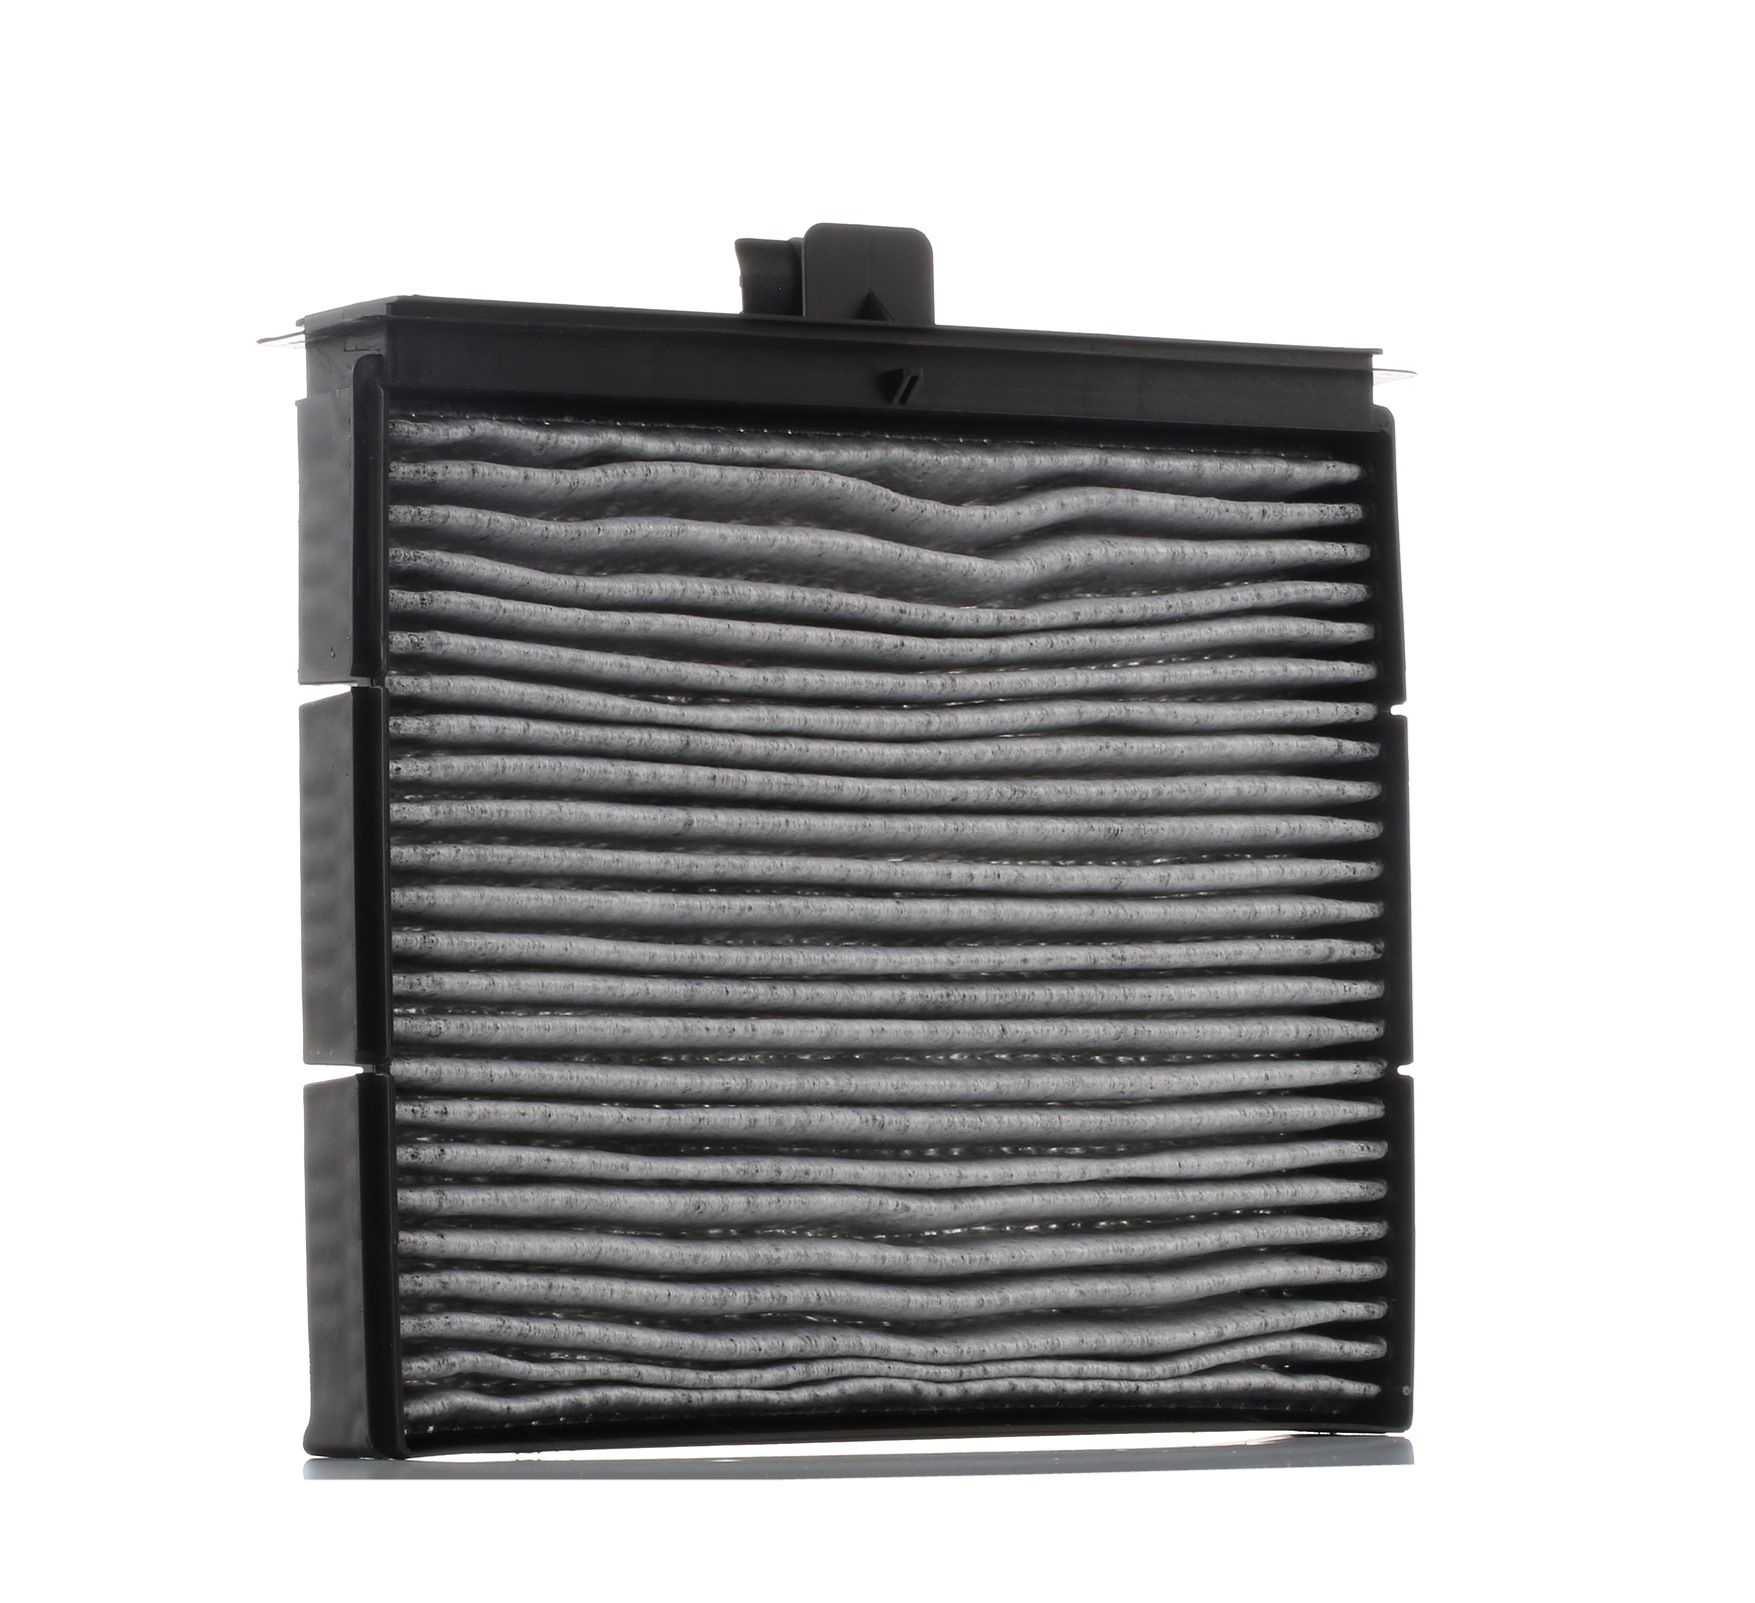 VALEO CLIMFILTER PROTECT Activated Carbon Filter, 241 mm x 217 mm x 40 mm Width: 217mm, Height: 40mm, Length: 241mm Cabin filter 715610 buy